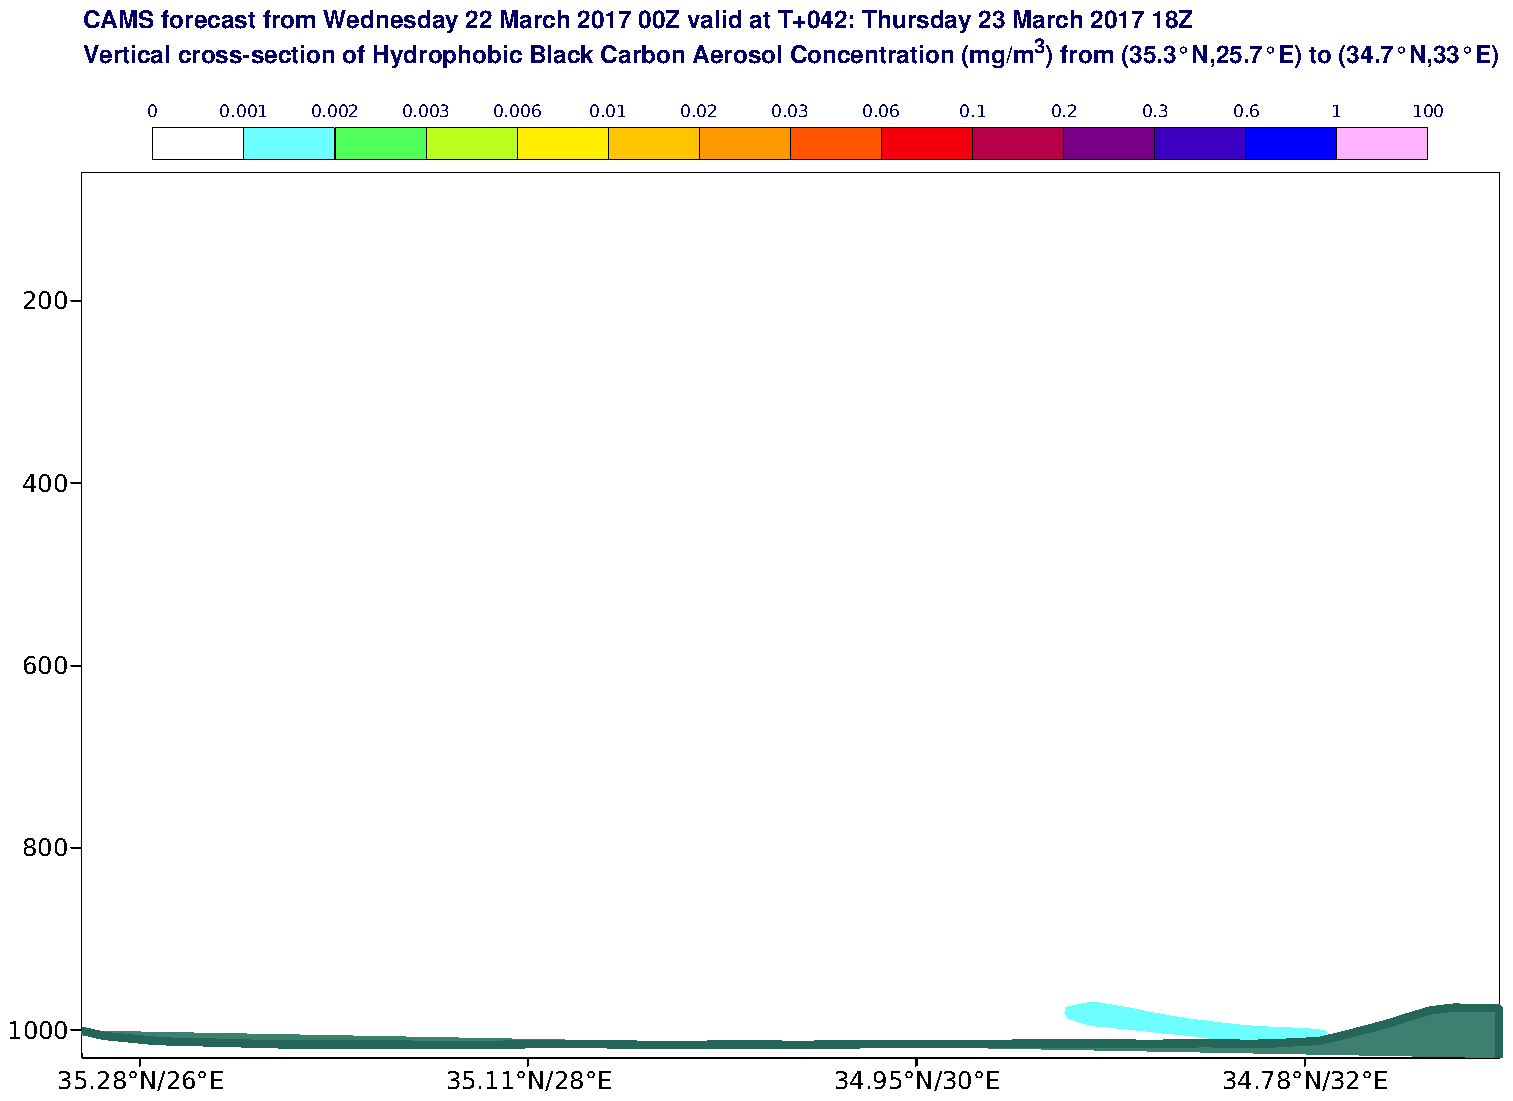 Vertical cross-section of Hydrophobic Black Carbon Aerosol Concentration (mg/m3) valid at T42 - 2017-03-23 18:00